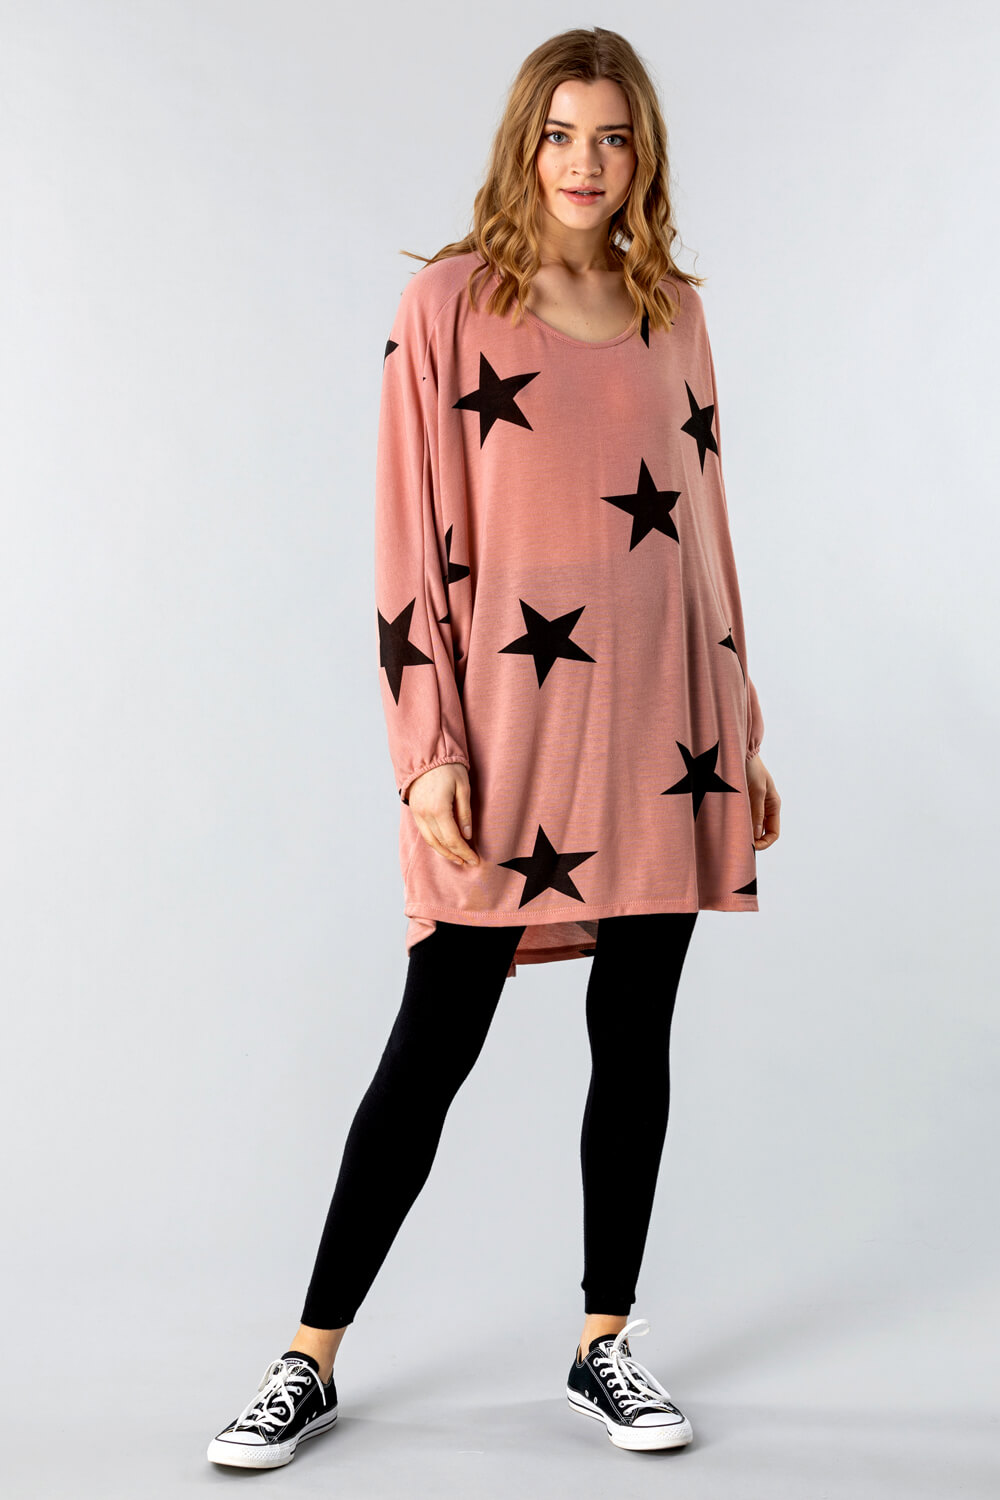 PINK One Size All Over Star Print Lounge Top, Image 2 of 4